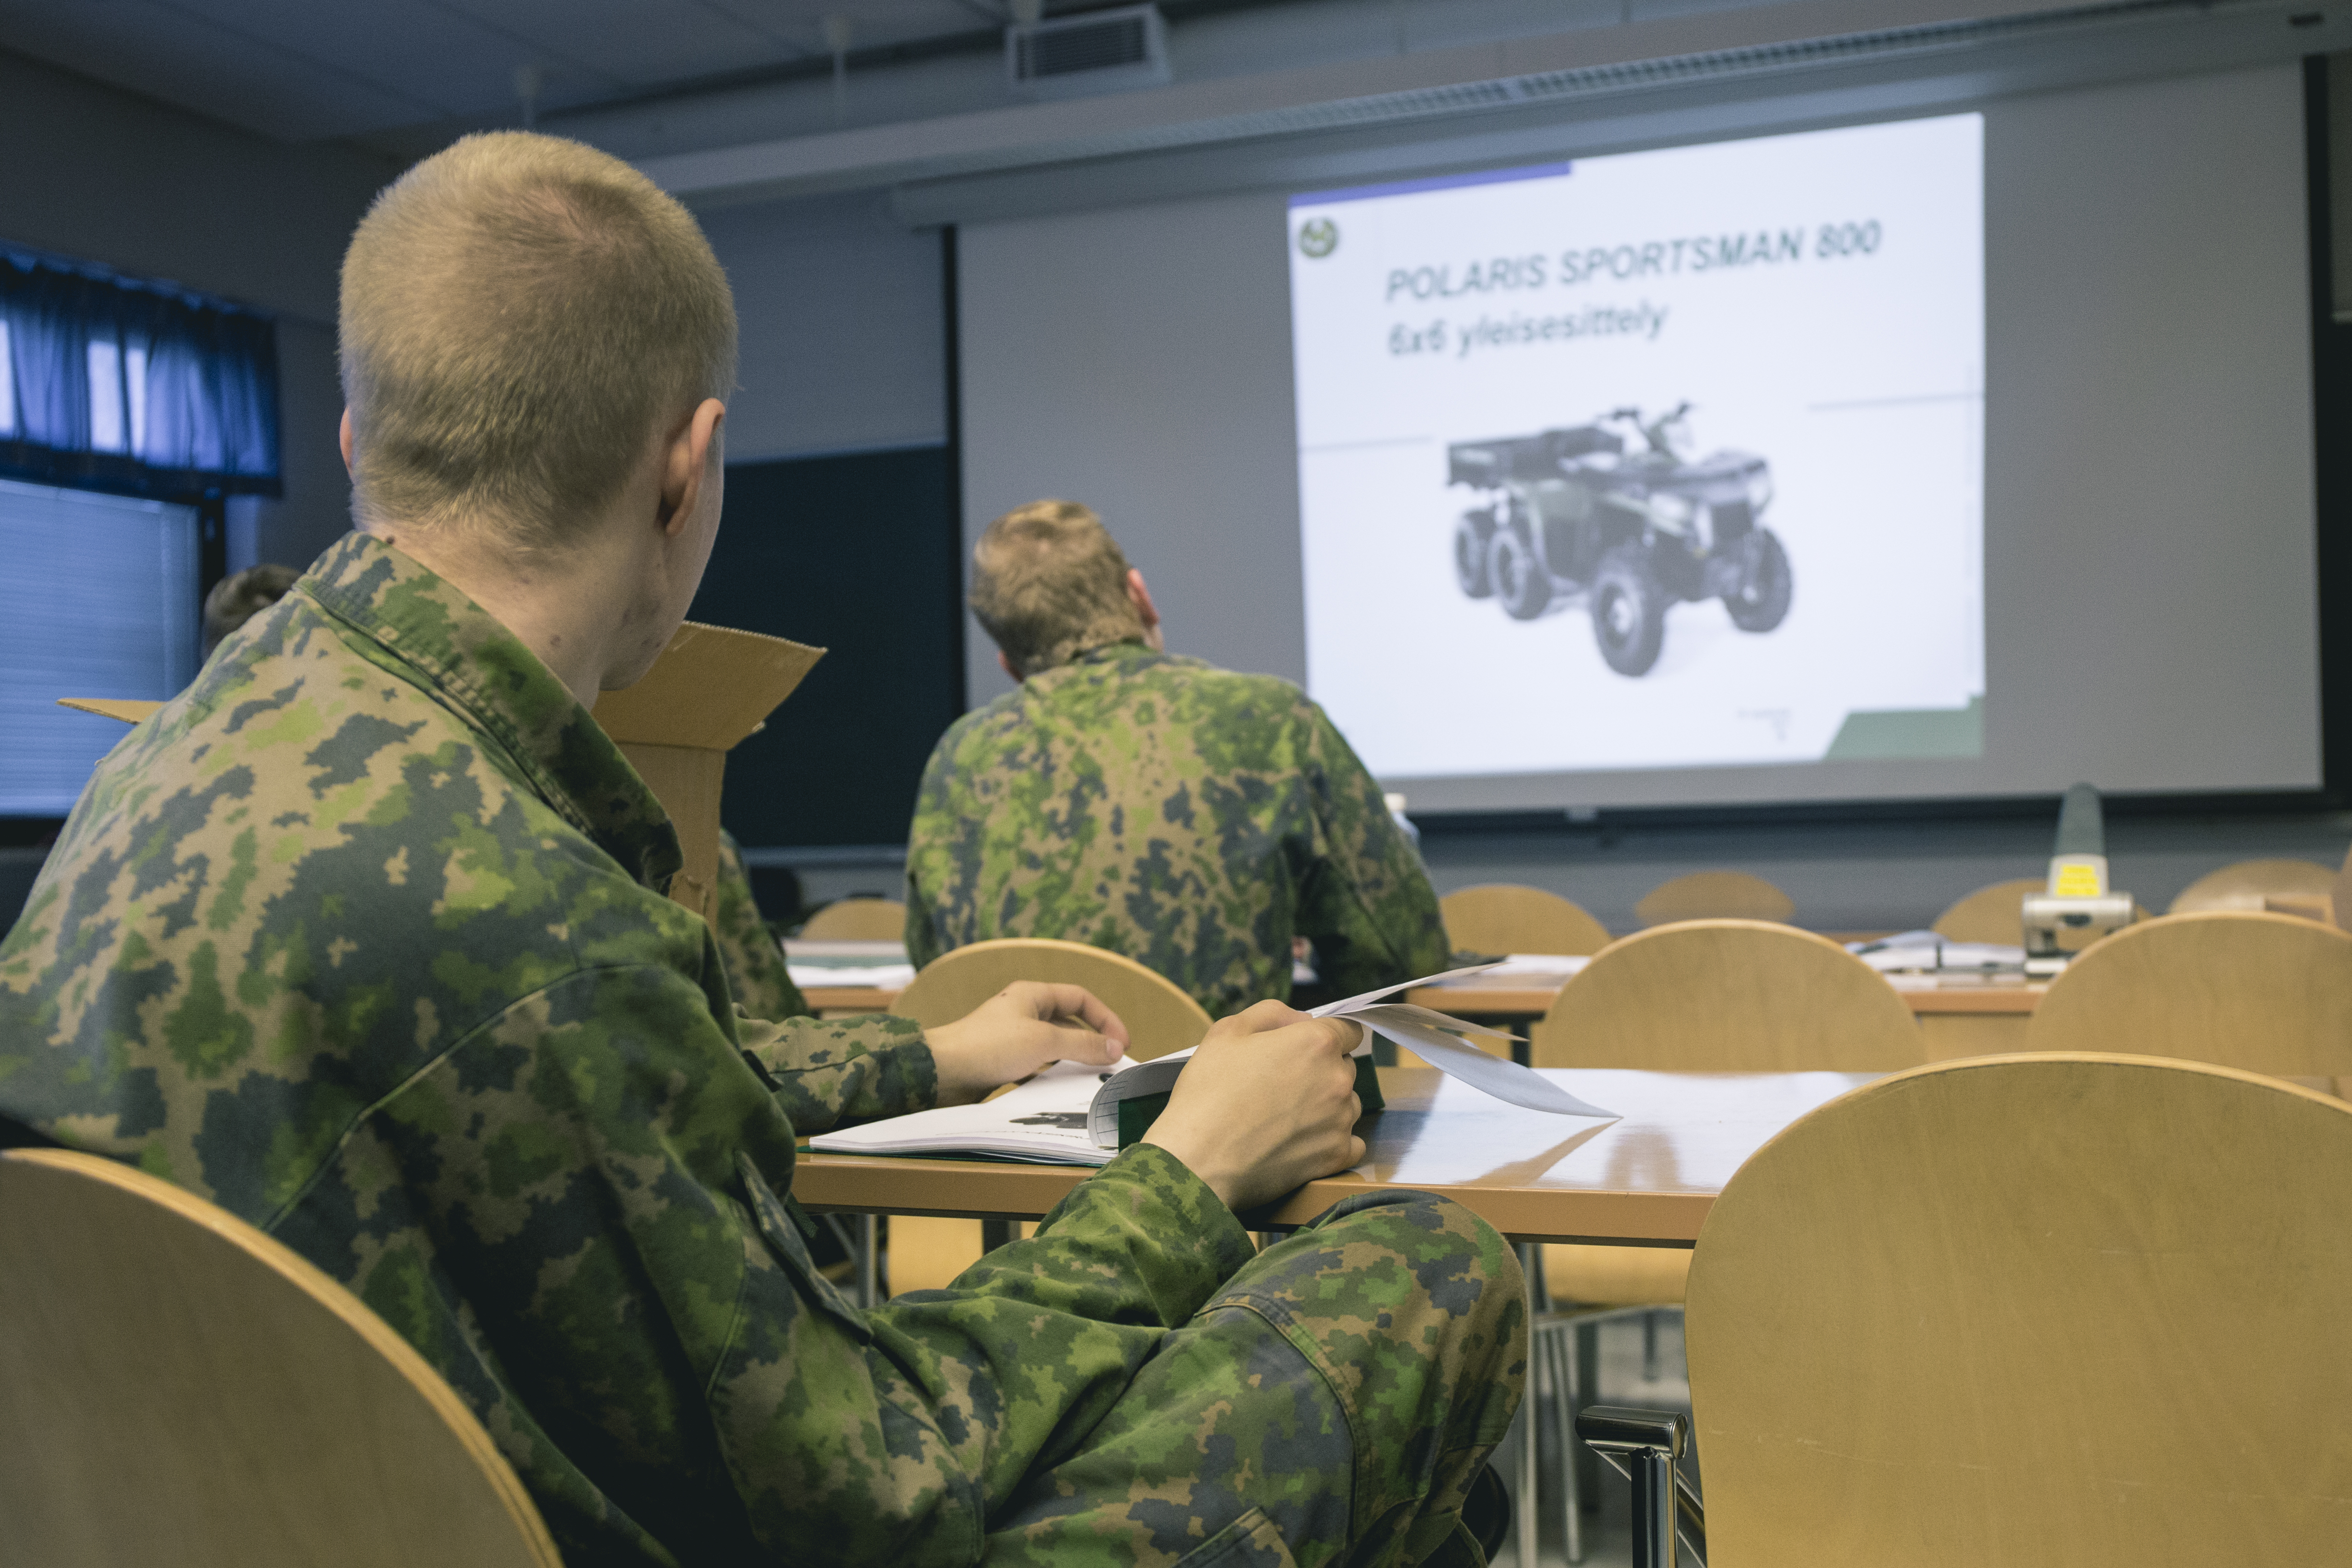  Soldiers in a classroom following a lesson. The screen reads an overview of the Polaris Sportsman 800.